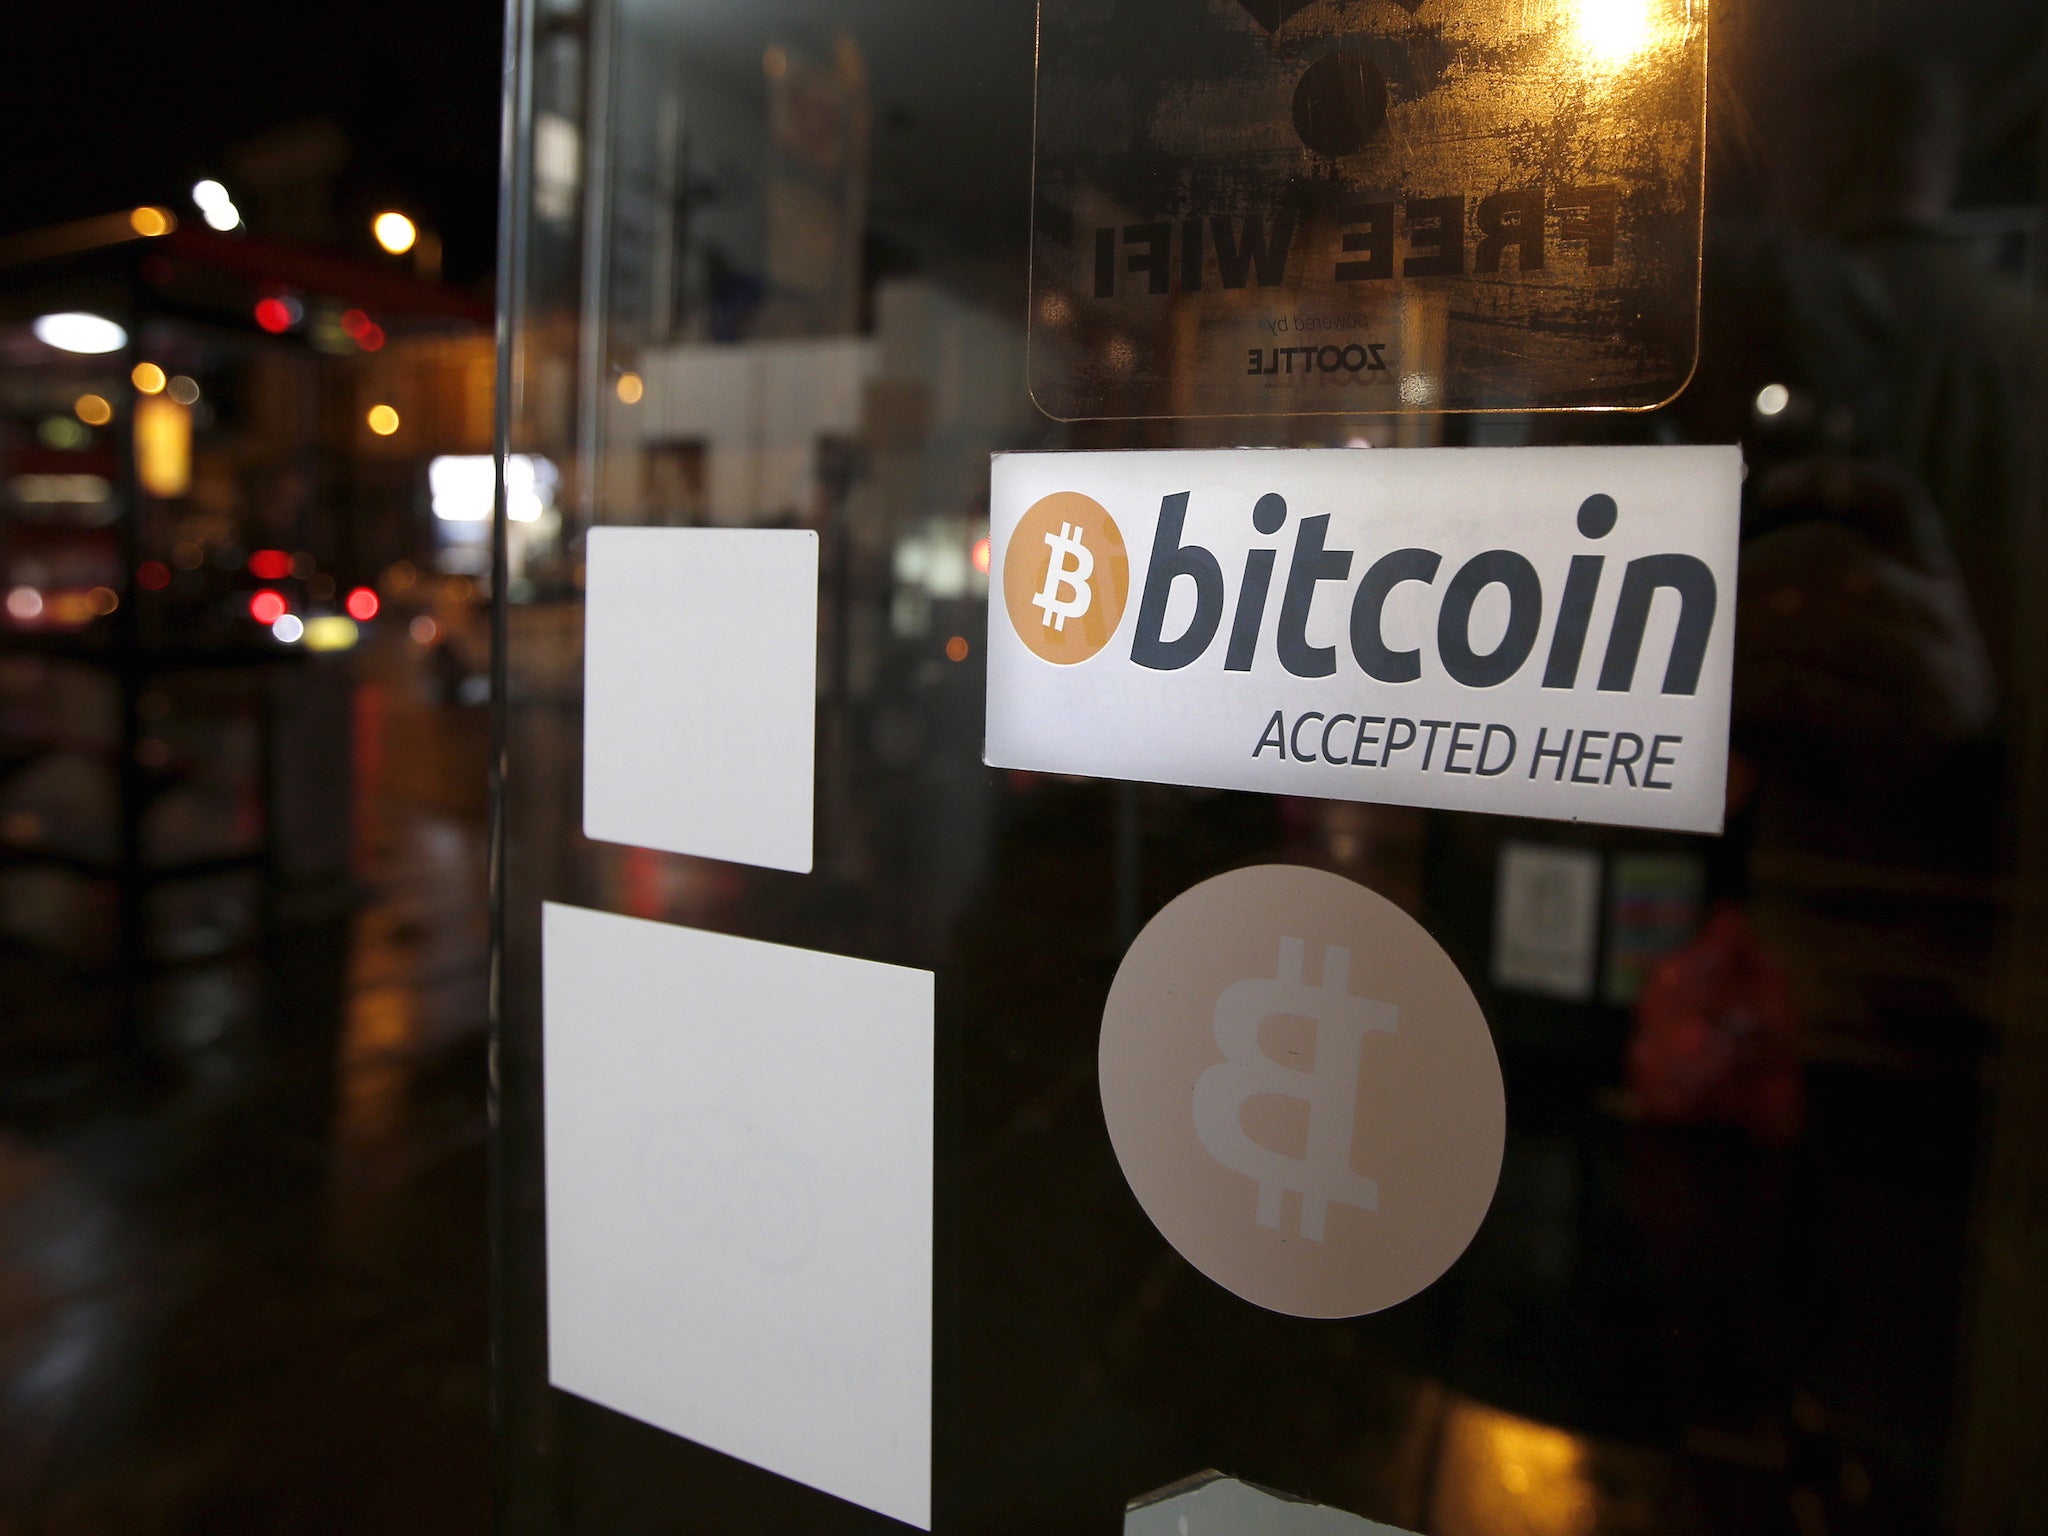 London cafe that accepts bitcoin payments